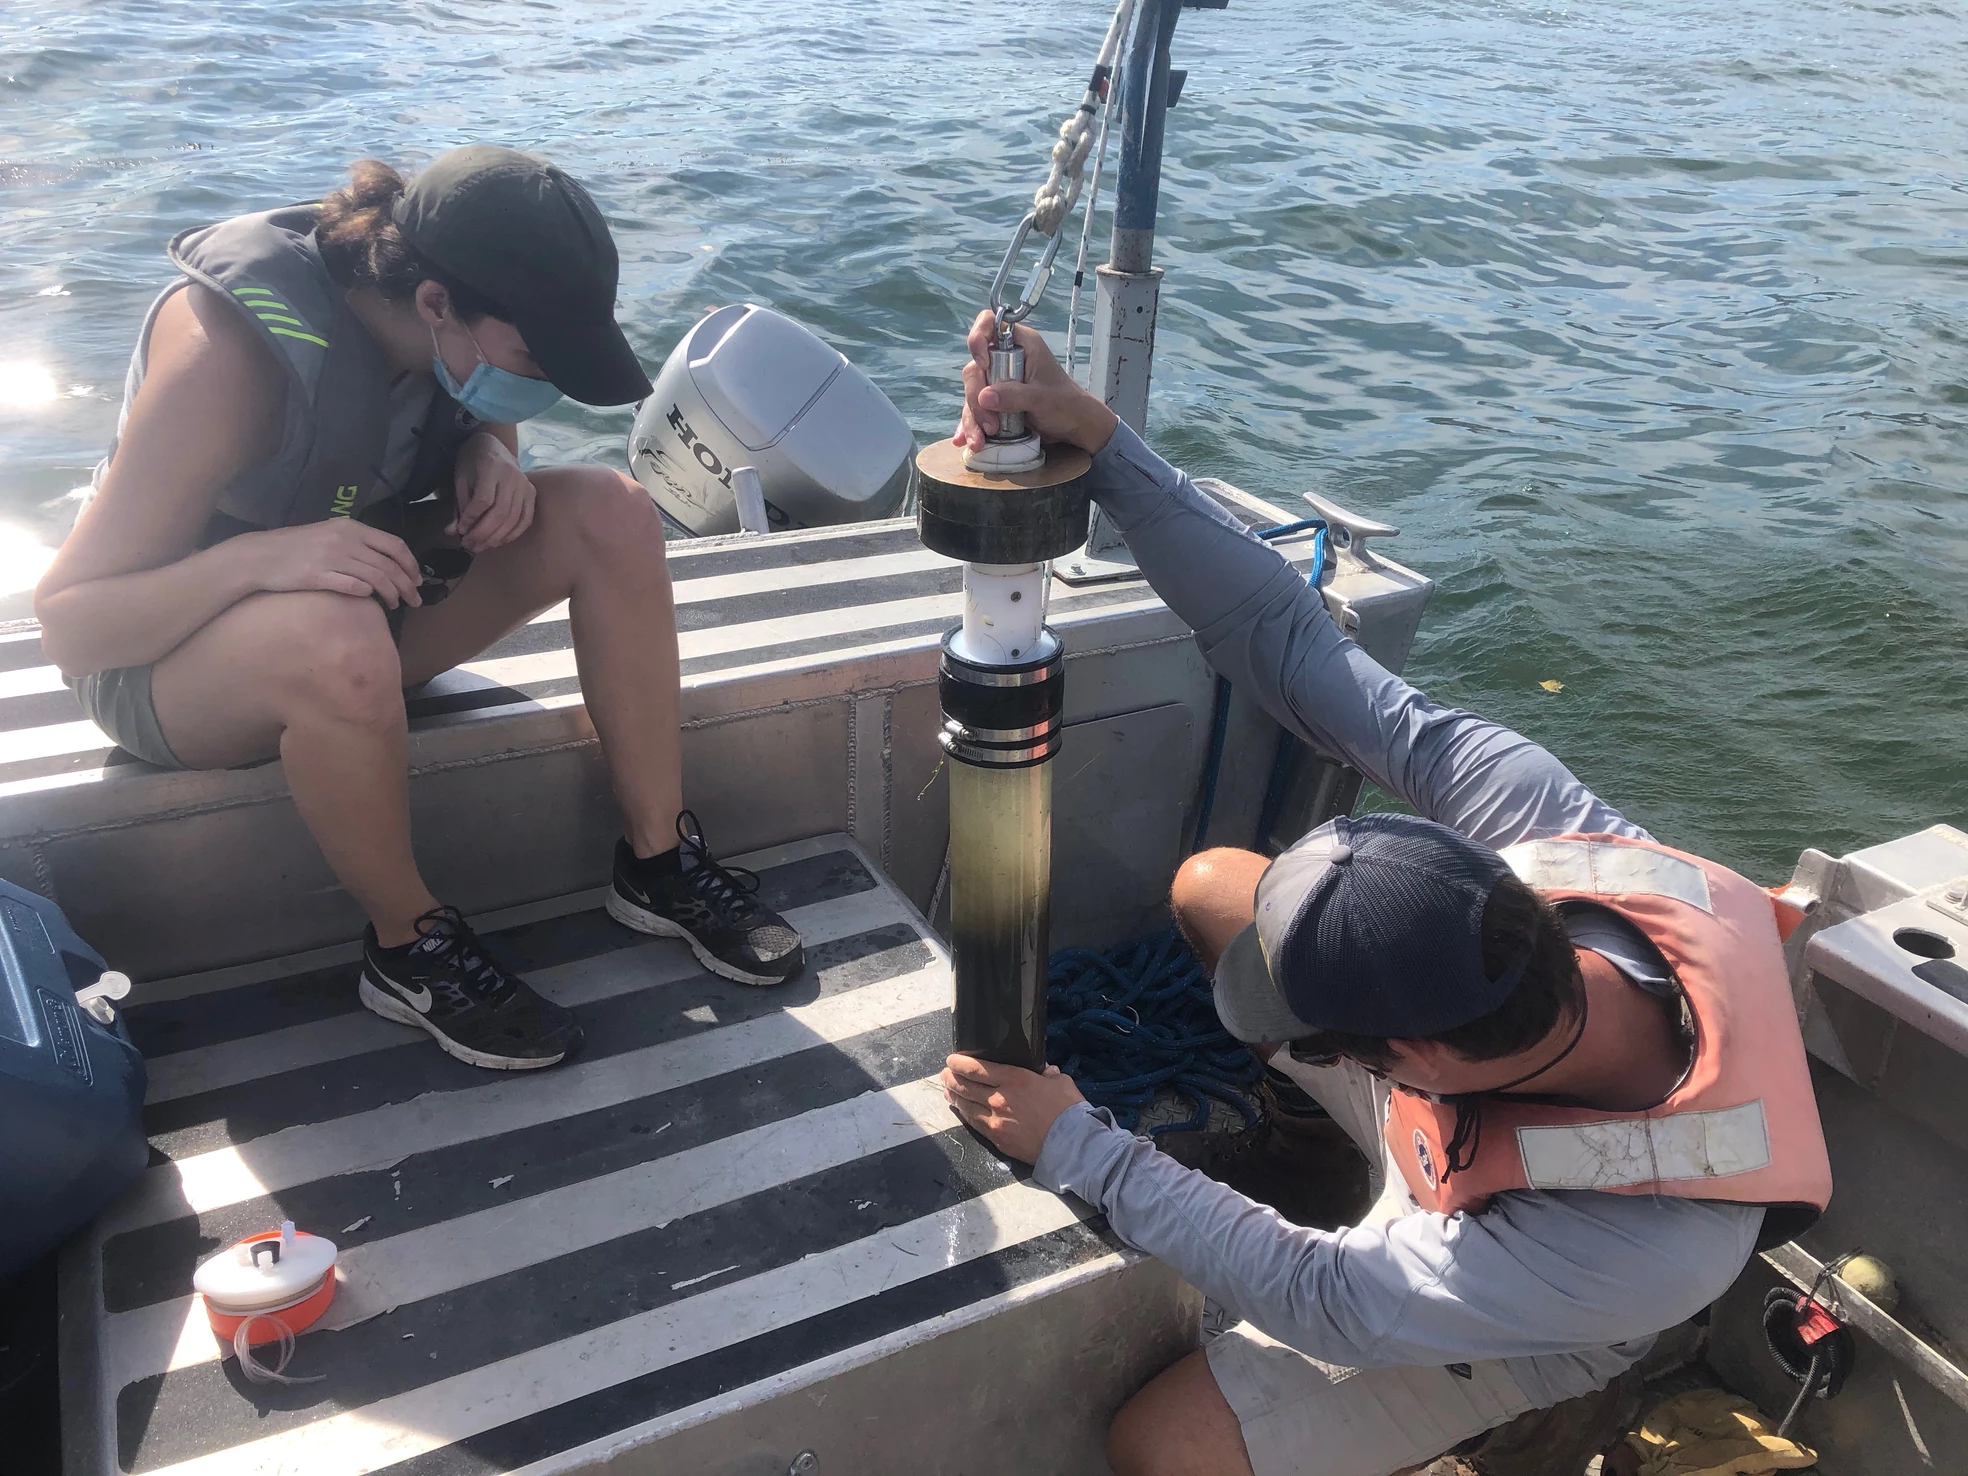 Scientists on a boat collecting sediments cores